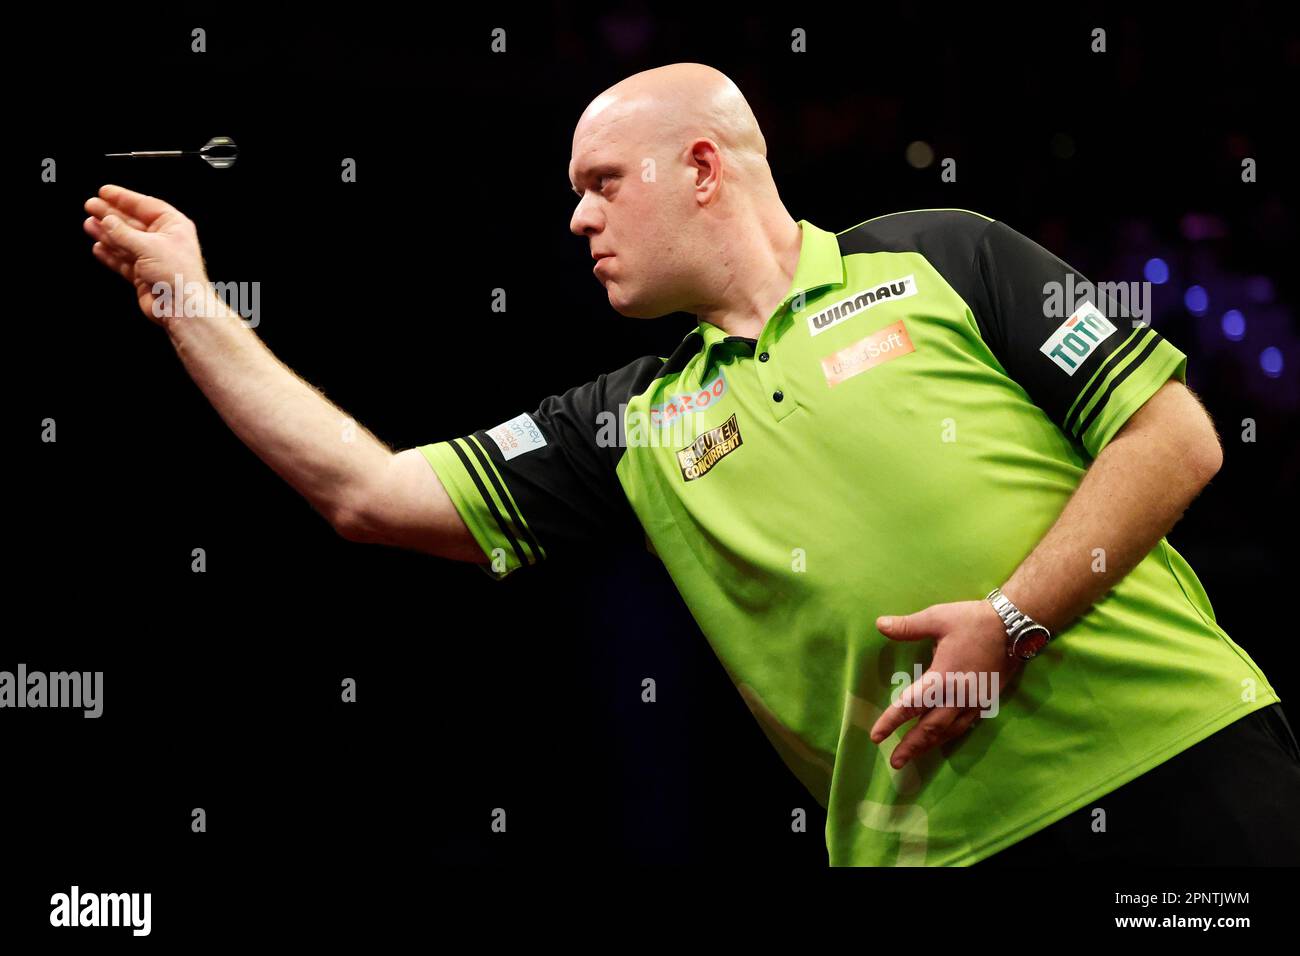 Rotterdam, Netherlands. April 20th, 2023. Michael van Gerwen in action  during the 12th round of the Premier League Darts in Ahoy. Credit:ANP/Alamy  Live News netherlands out - belgium out Stock Photo -